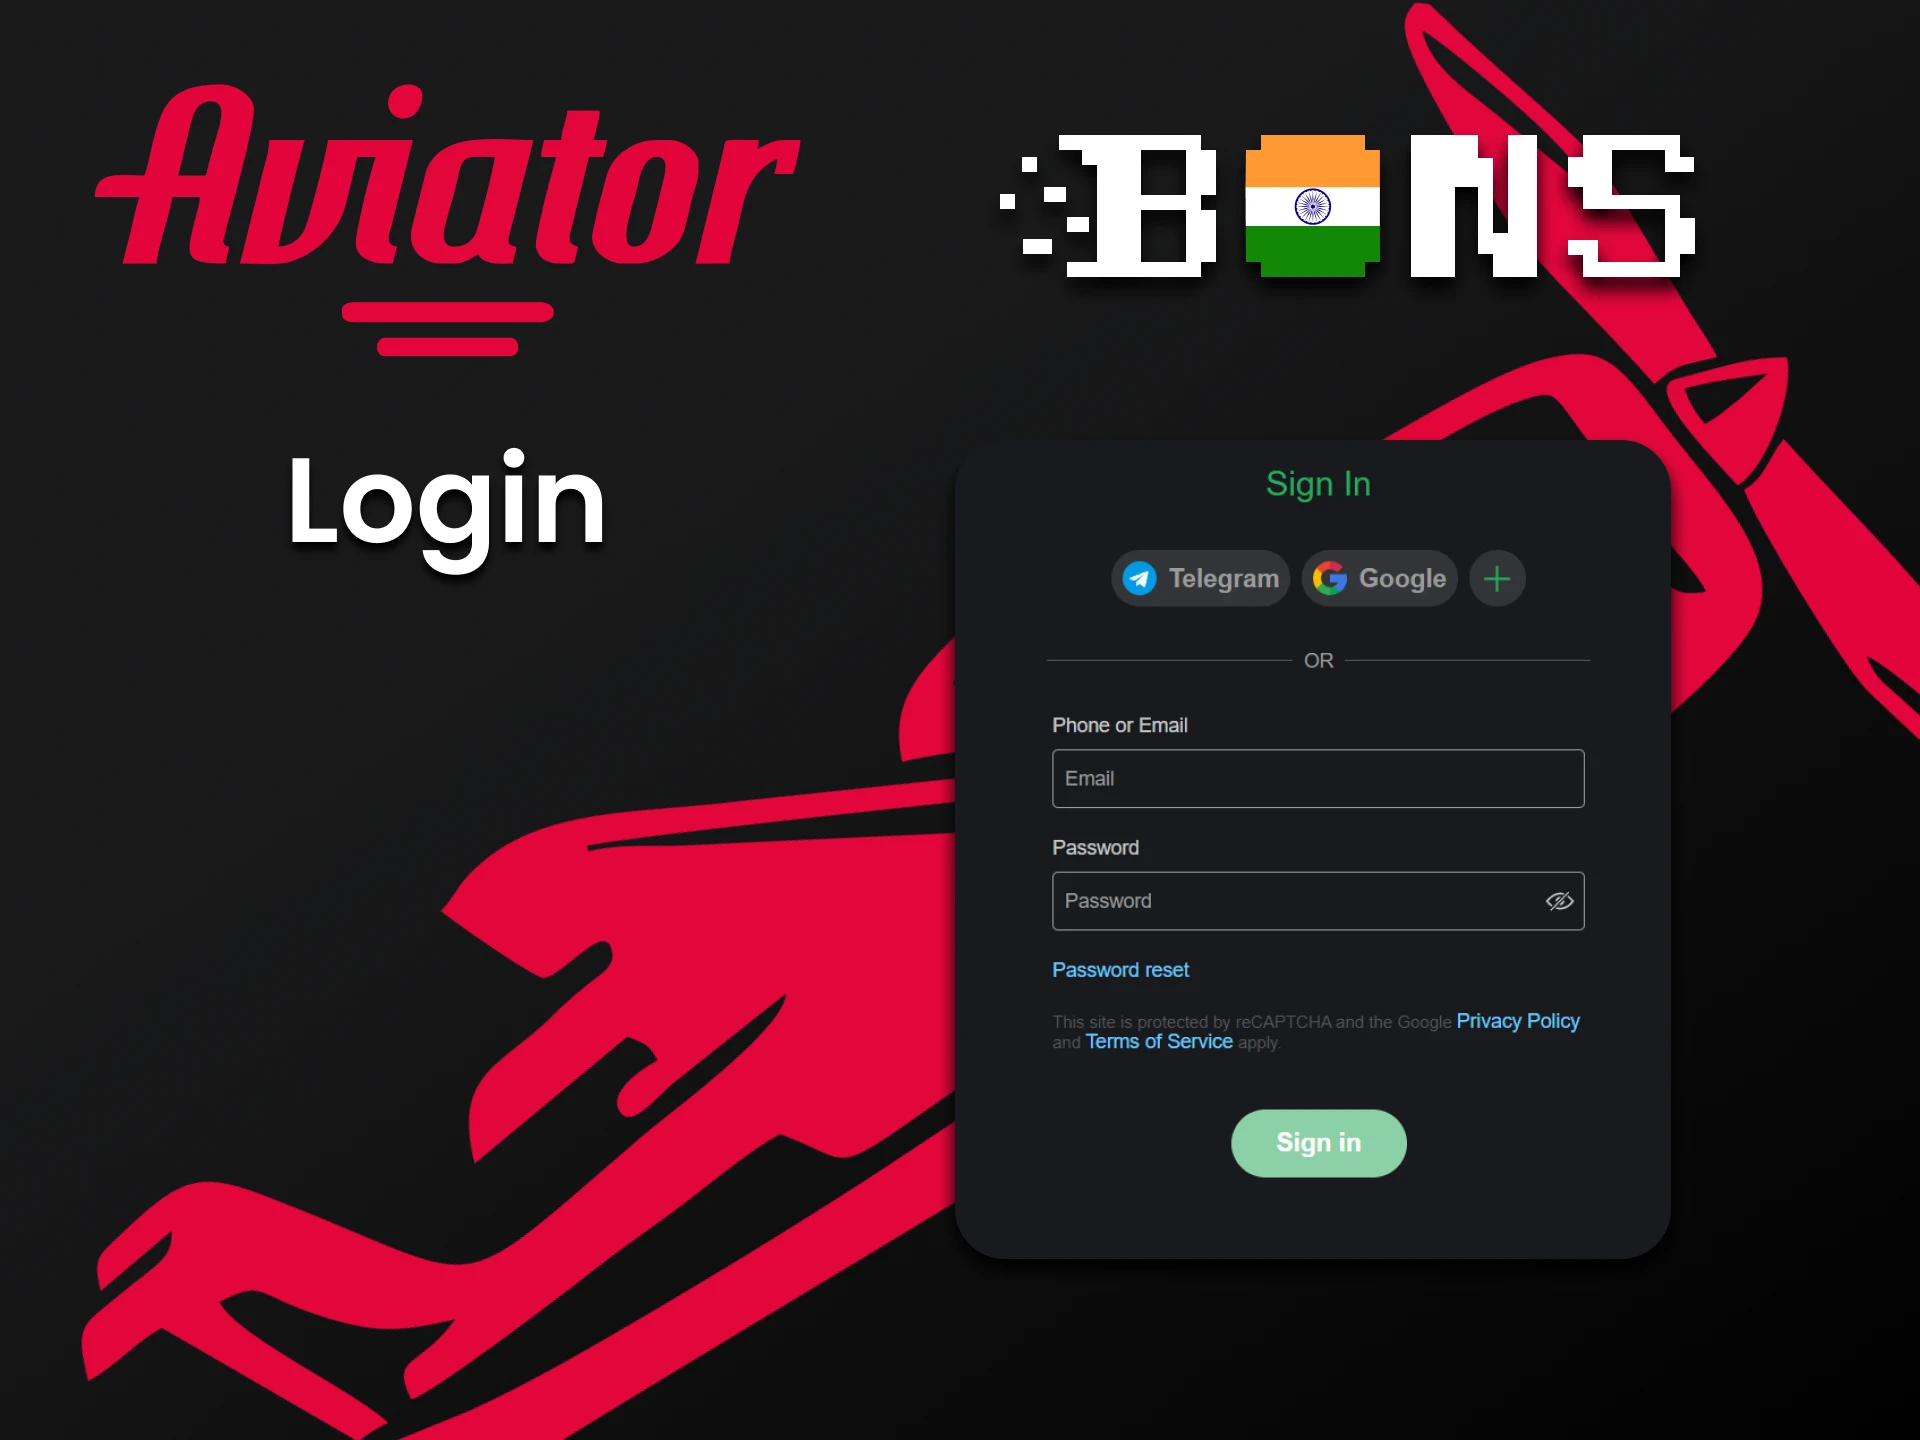 By logging into your personal account on Bons, you can play Aviator.